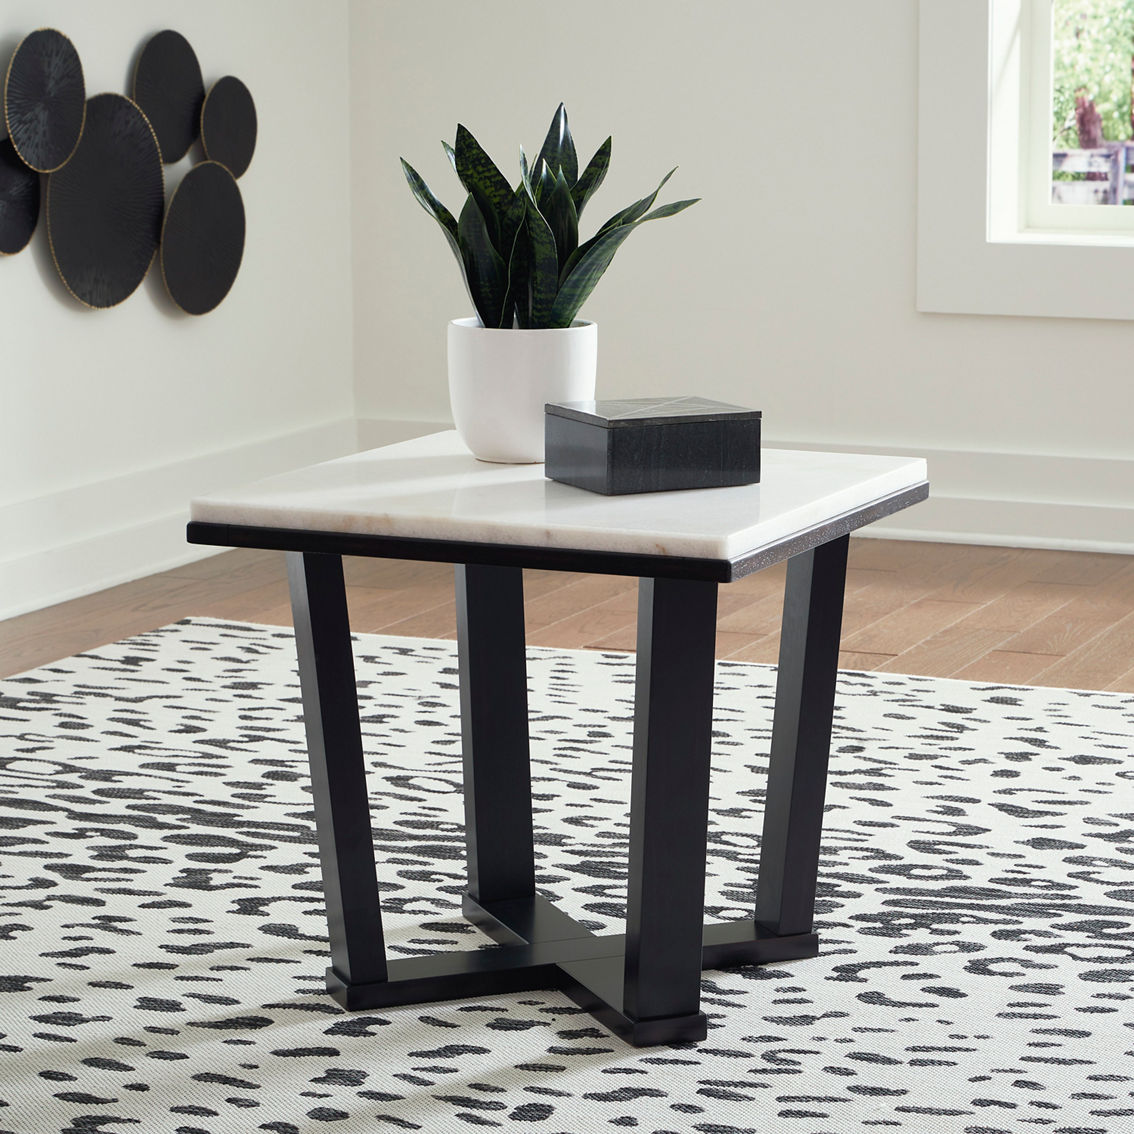 Signature Design by Ashley Fostead End Table - Image 2 of 2